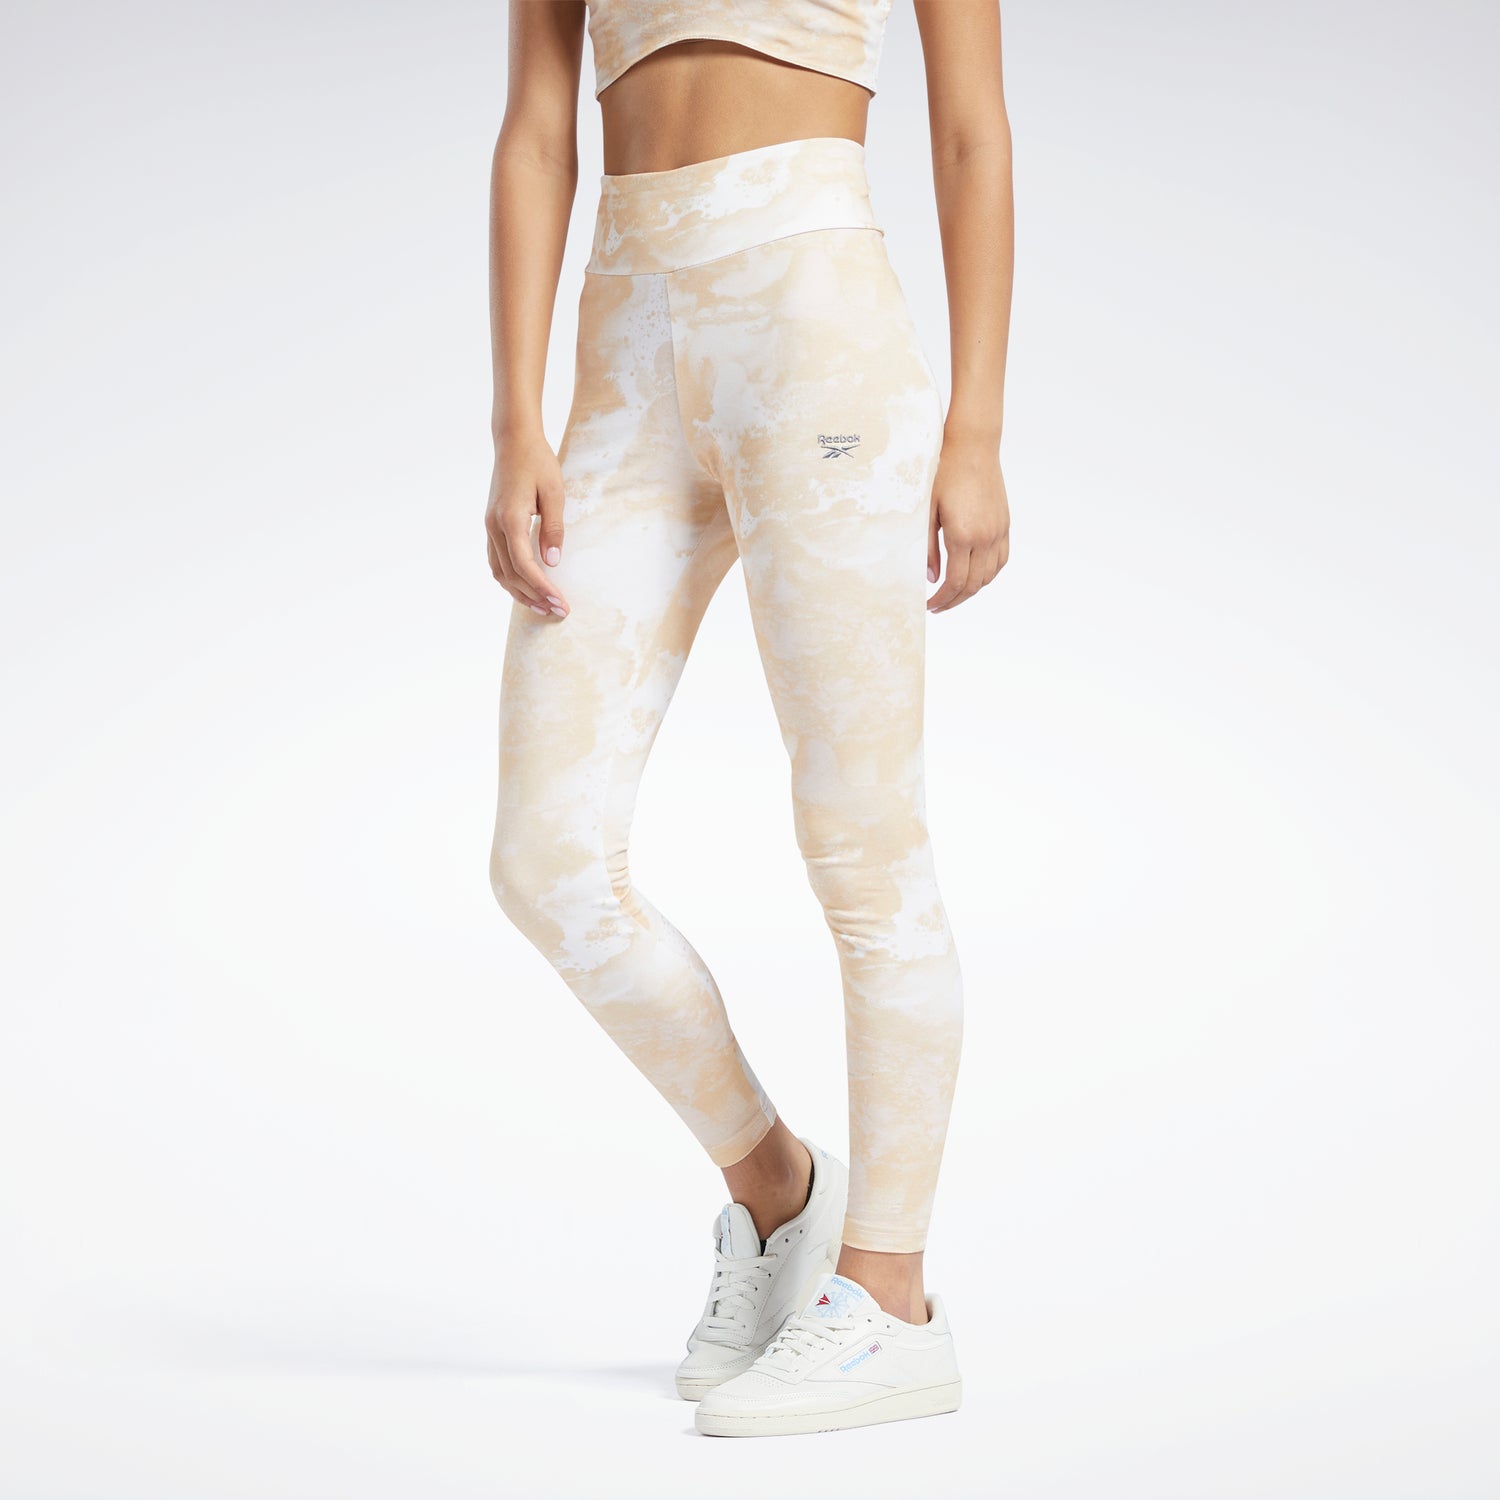 Leggings & Tights | TIGHTS 1/1 - Newest